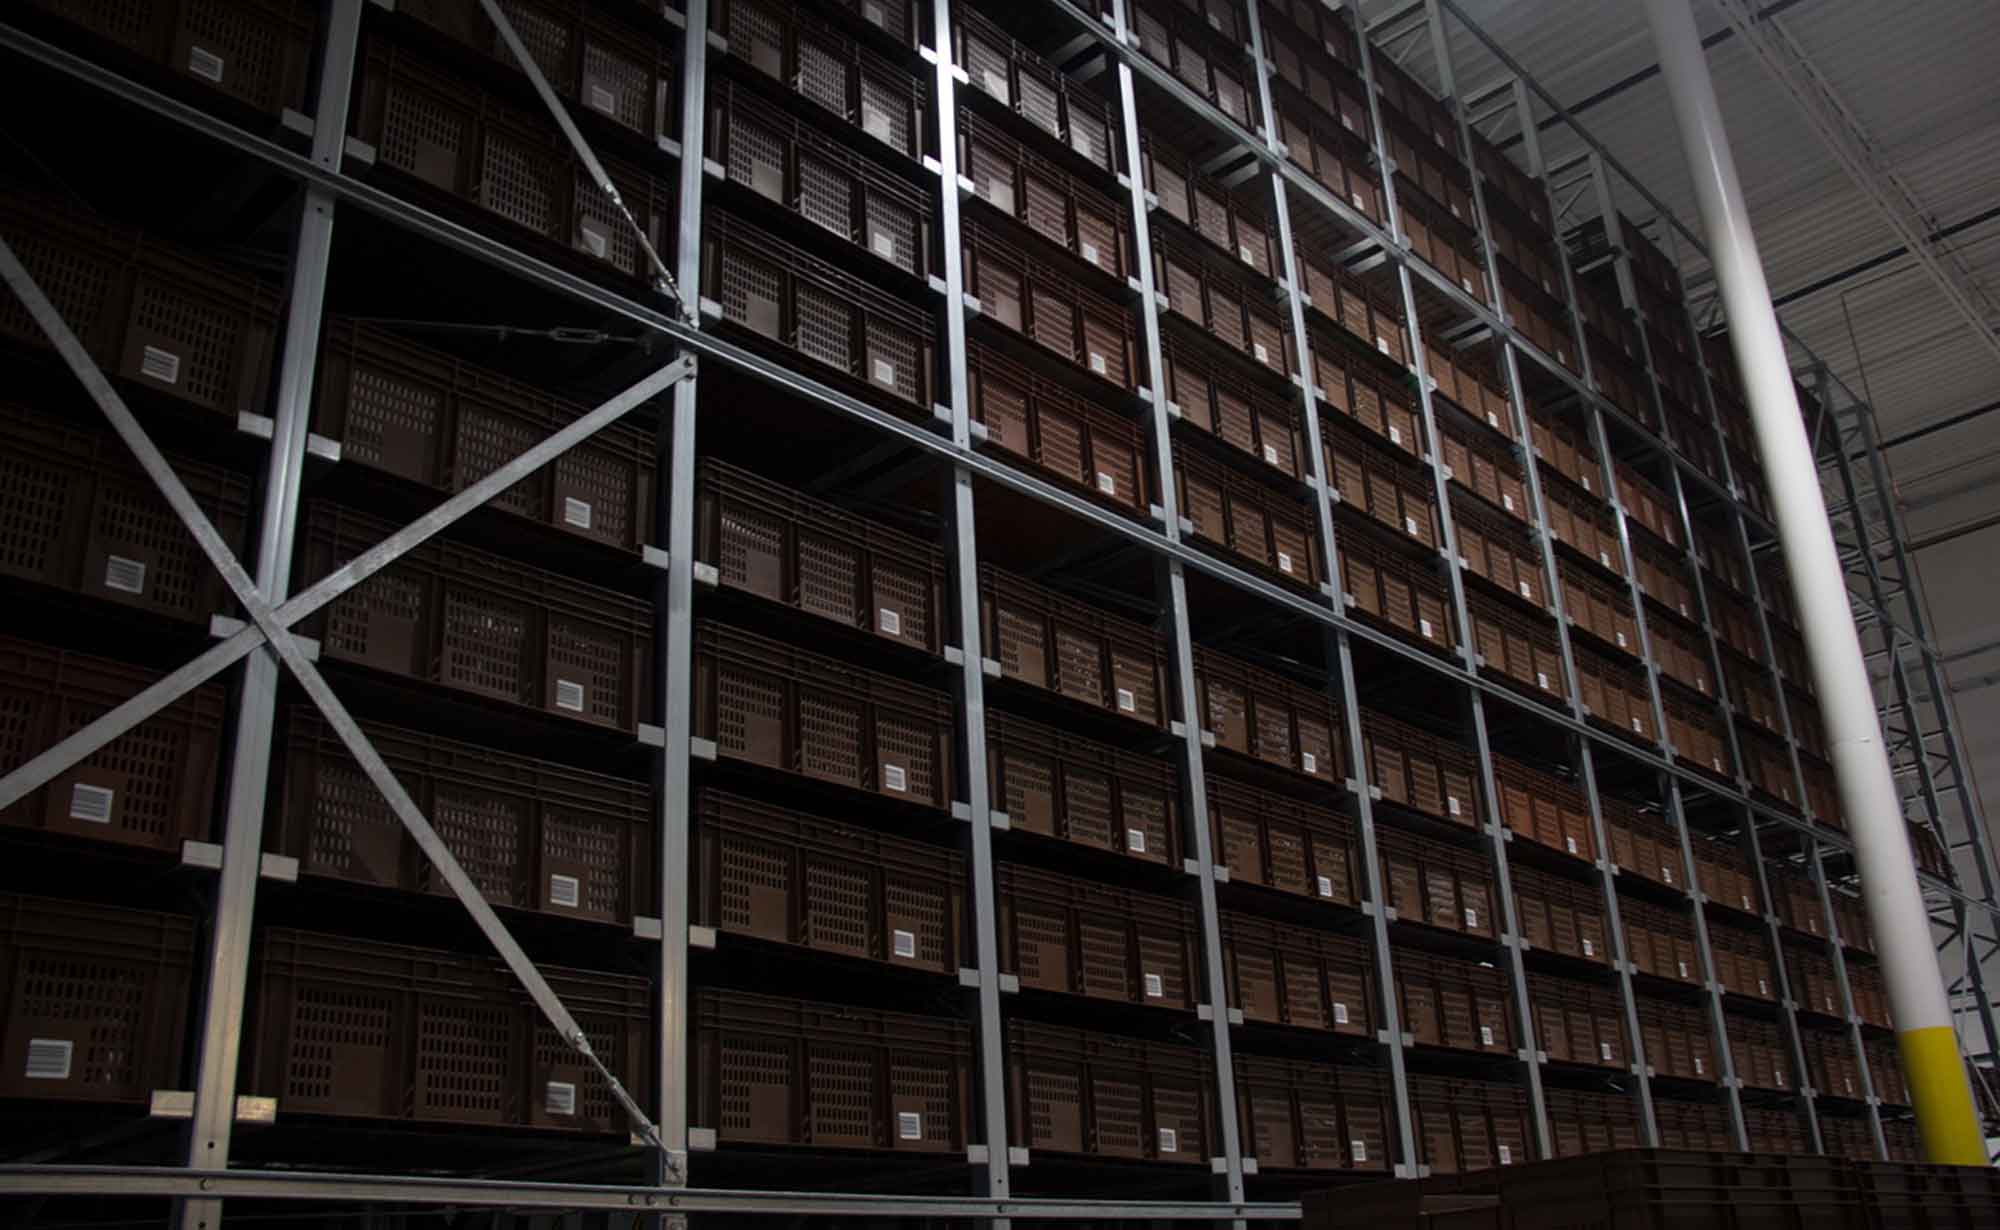 Automated Storage and Retrieval Systems vs. the Amazon Effect